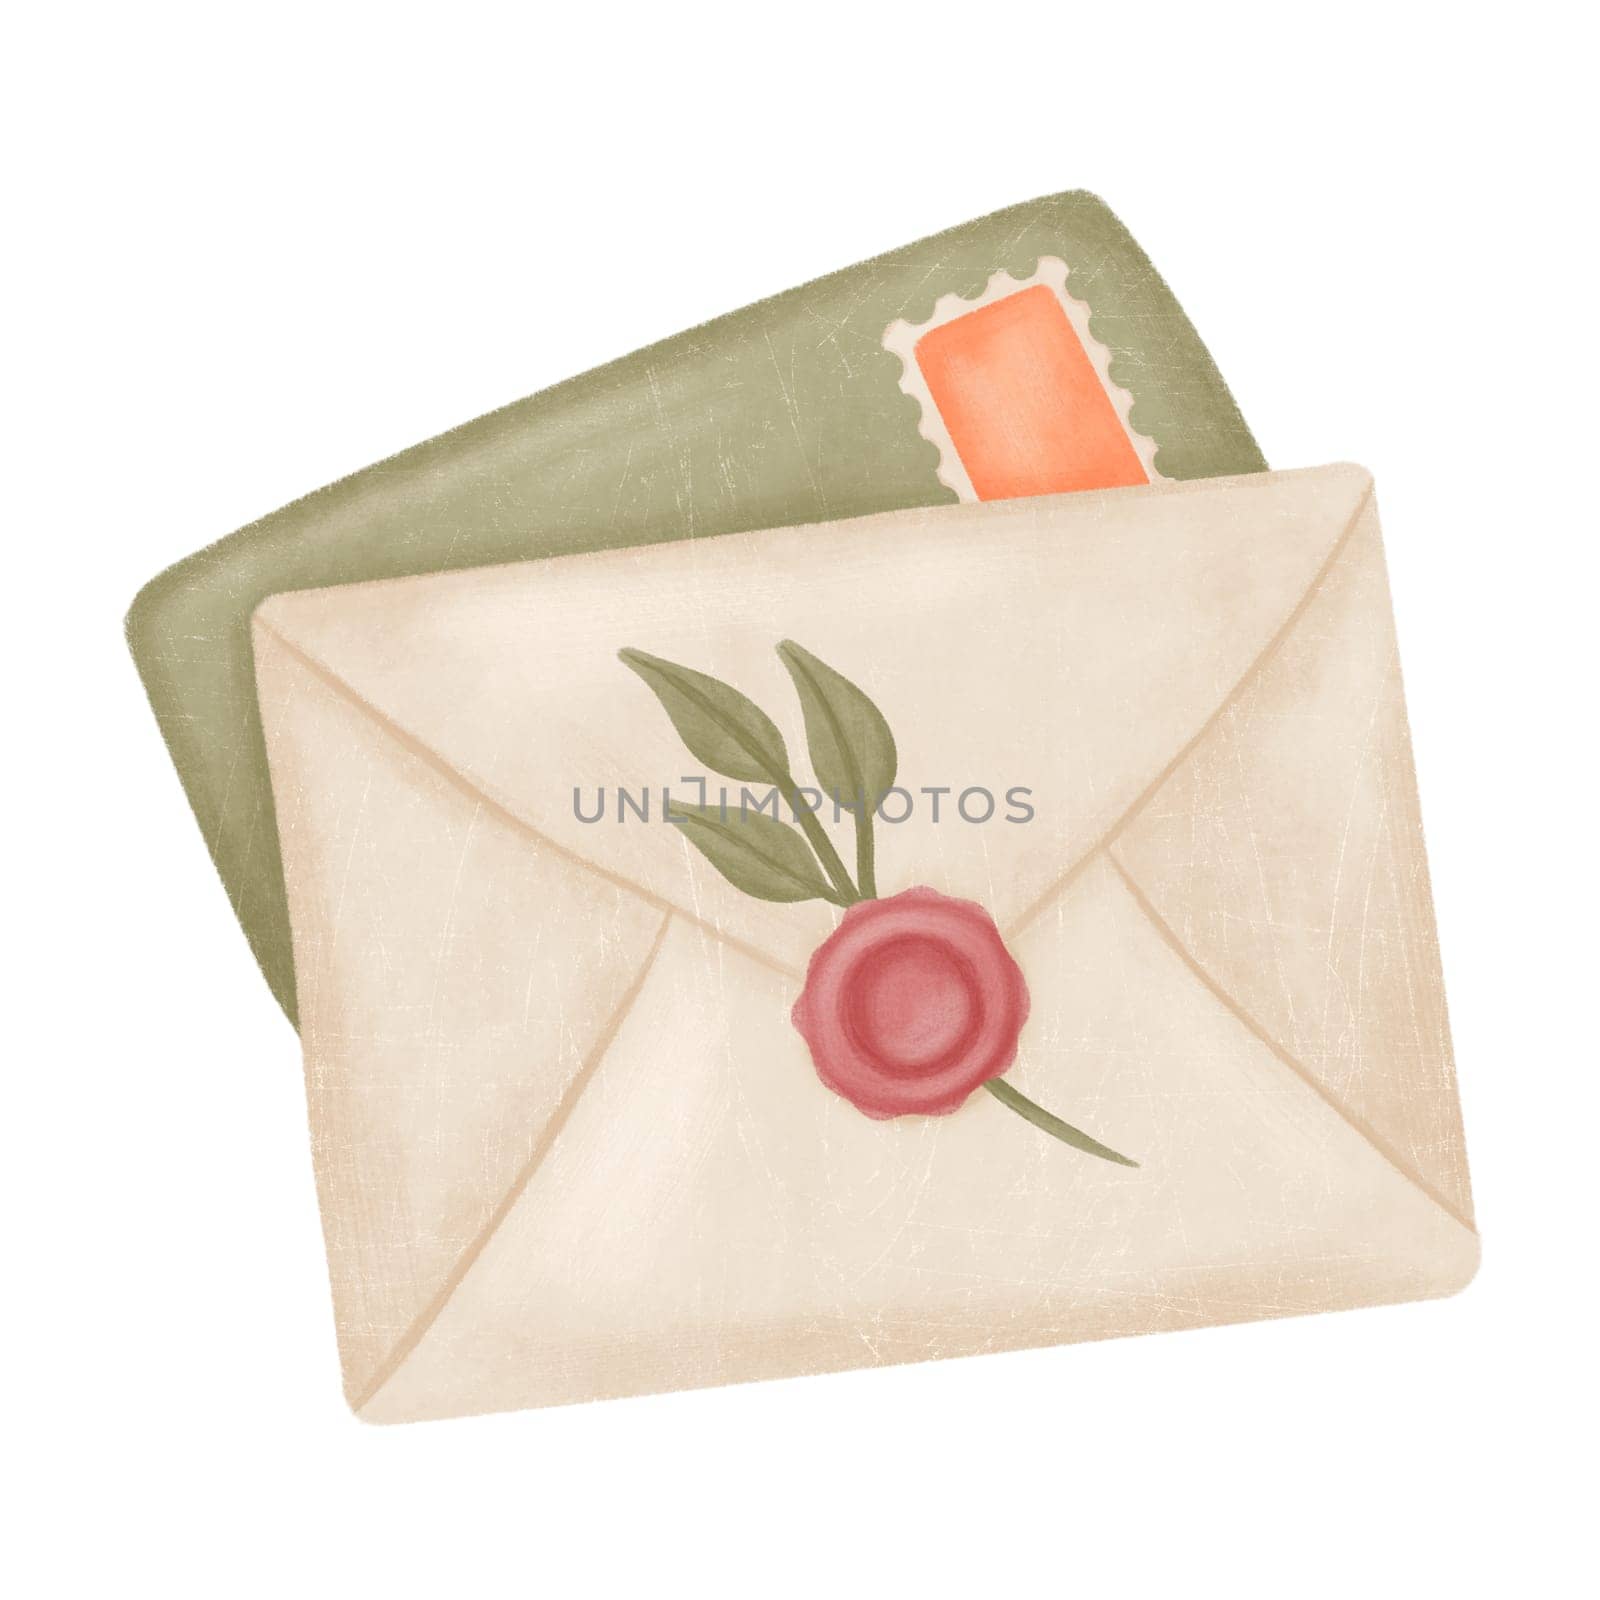 illustration of funky retro airmail envelope with stamp isolated on white background by alenabo_art